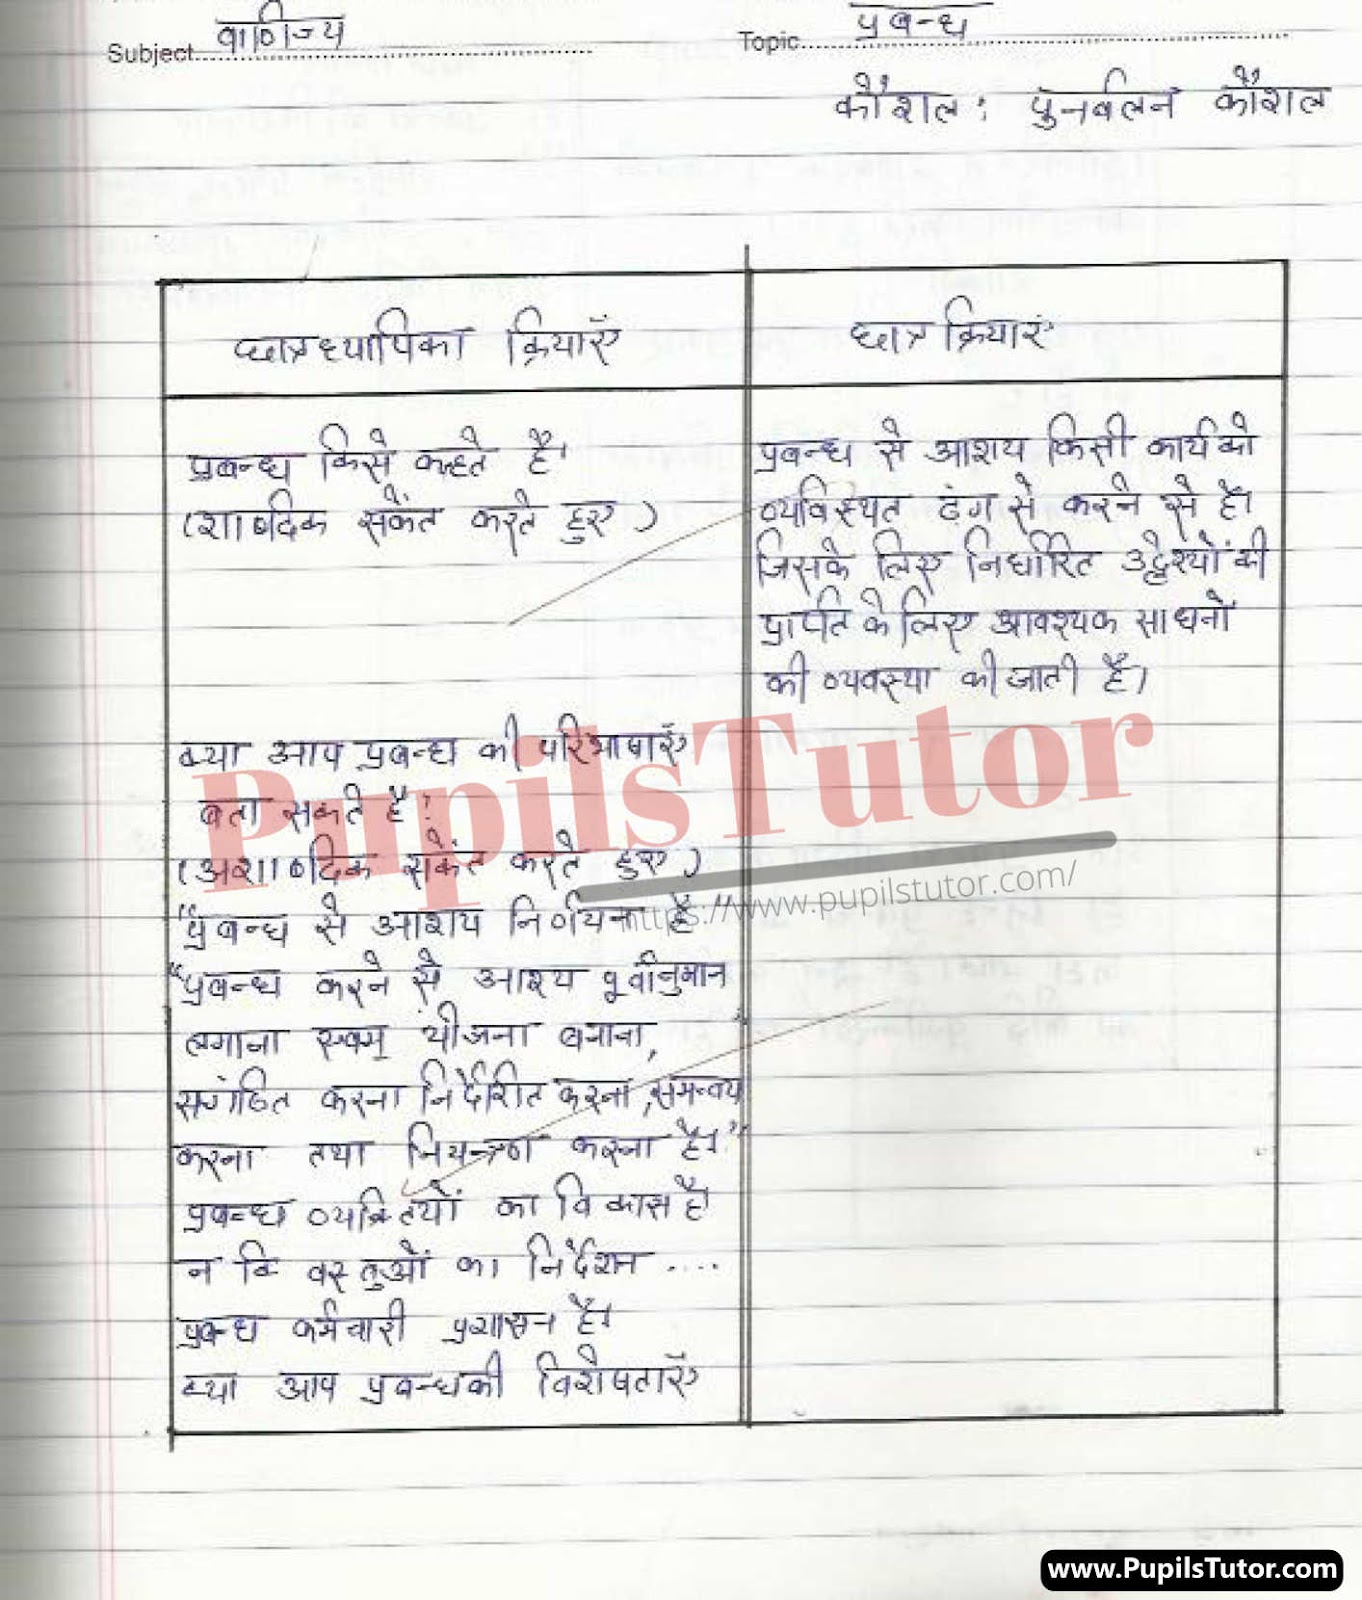 Prabandh Lesson Plan | Management Lesson Plan In Hindi For Class 10 – (Page And Image Number 1) – Pupils Tutor